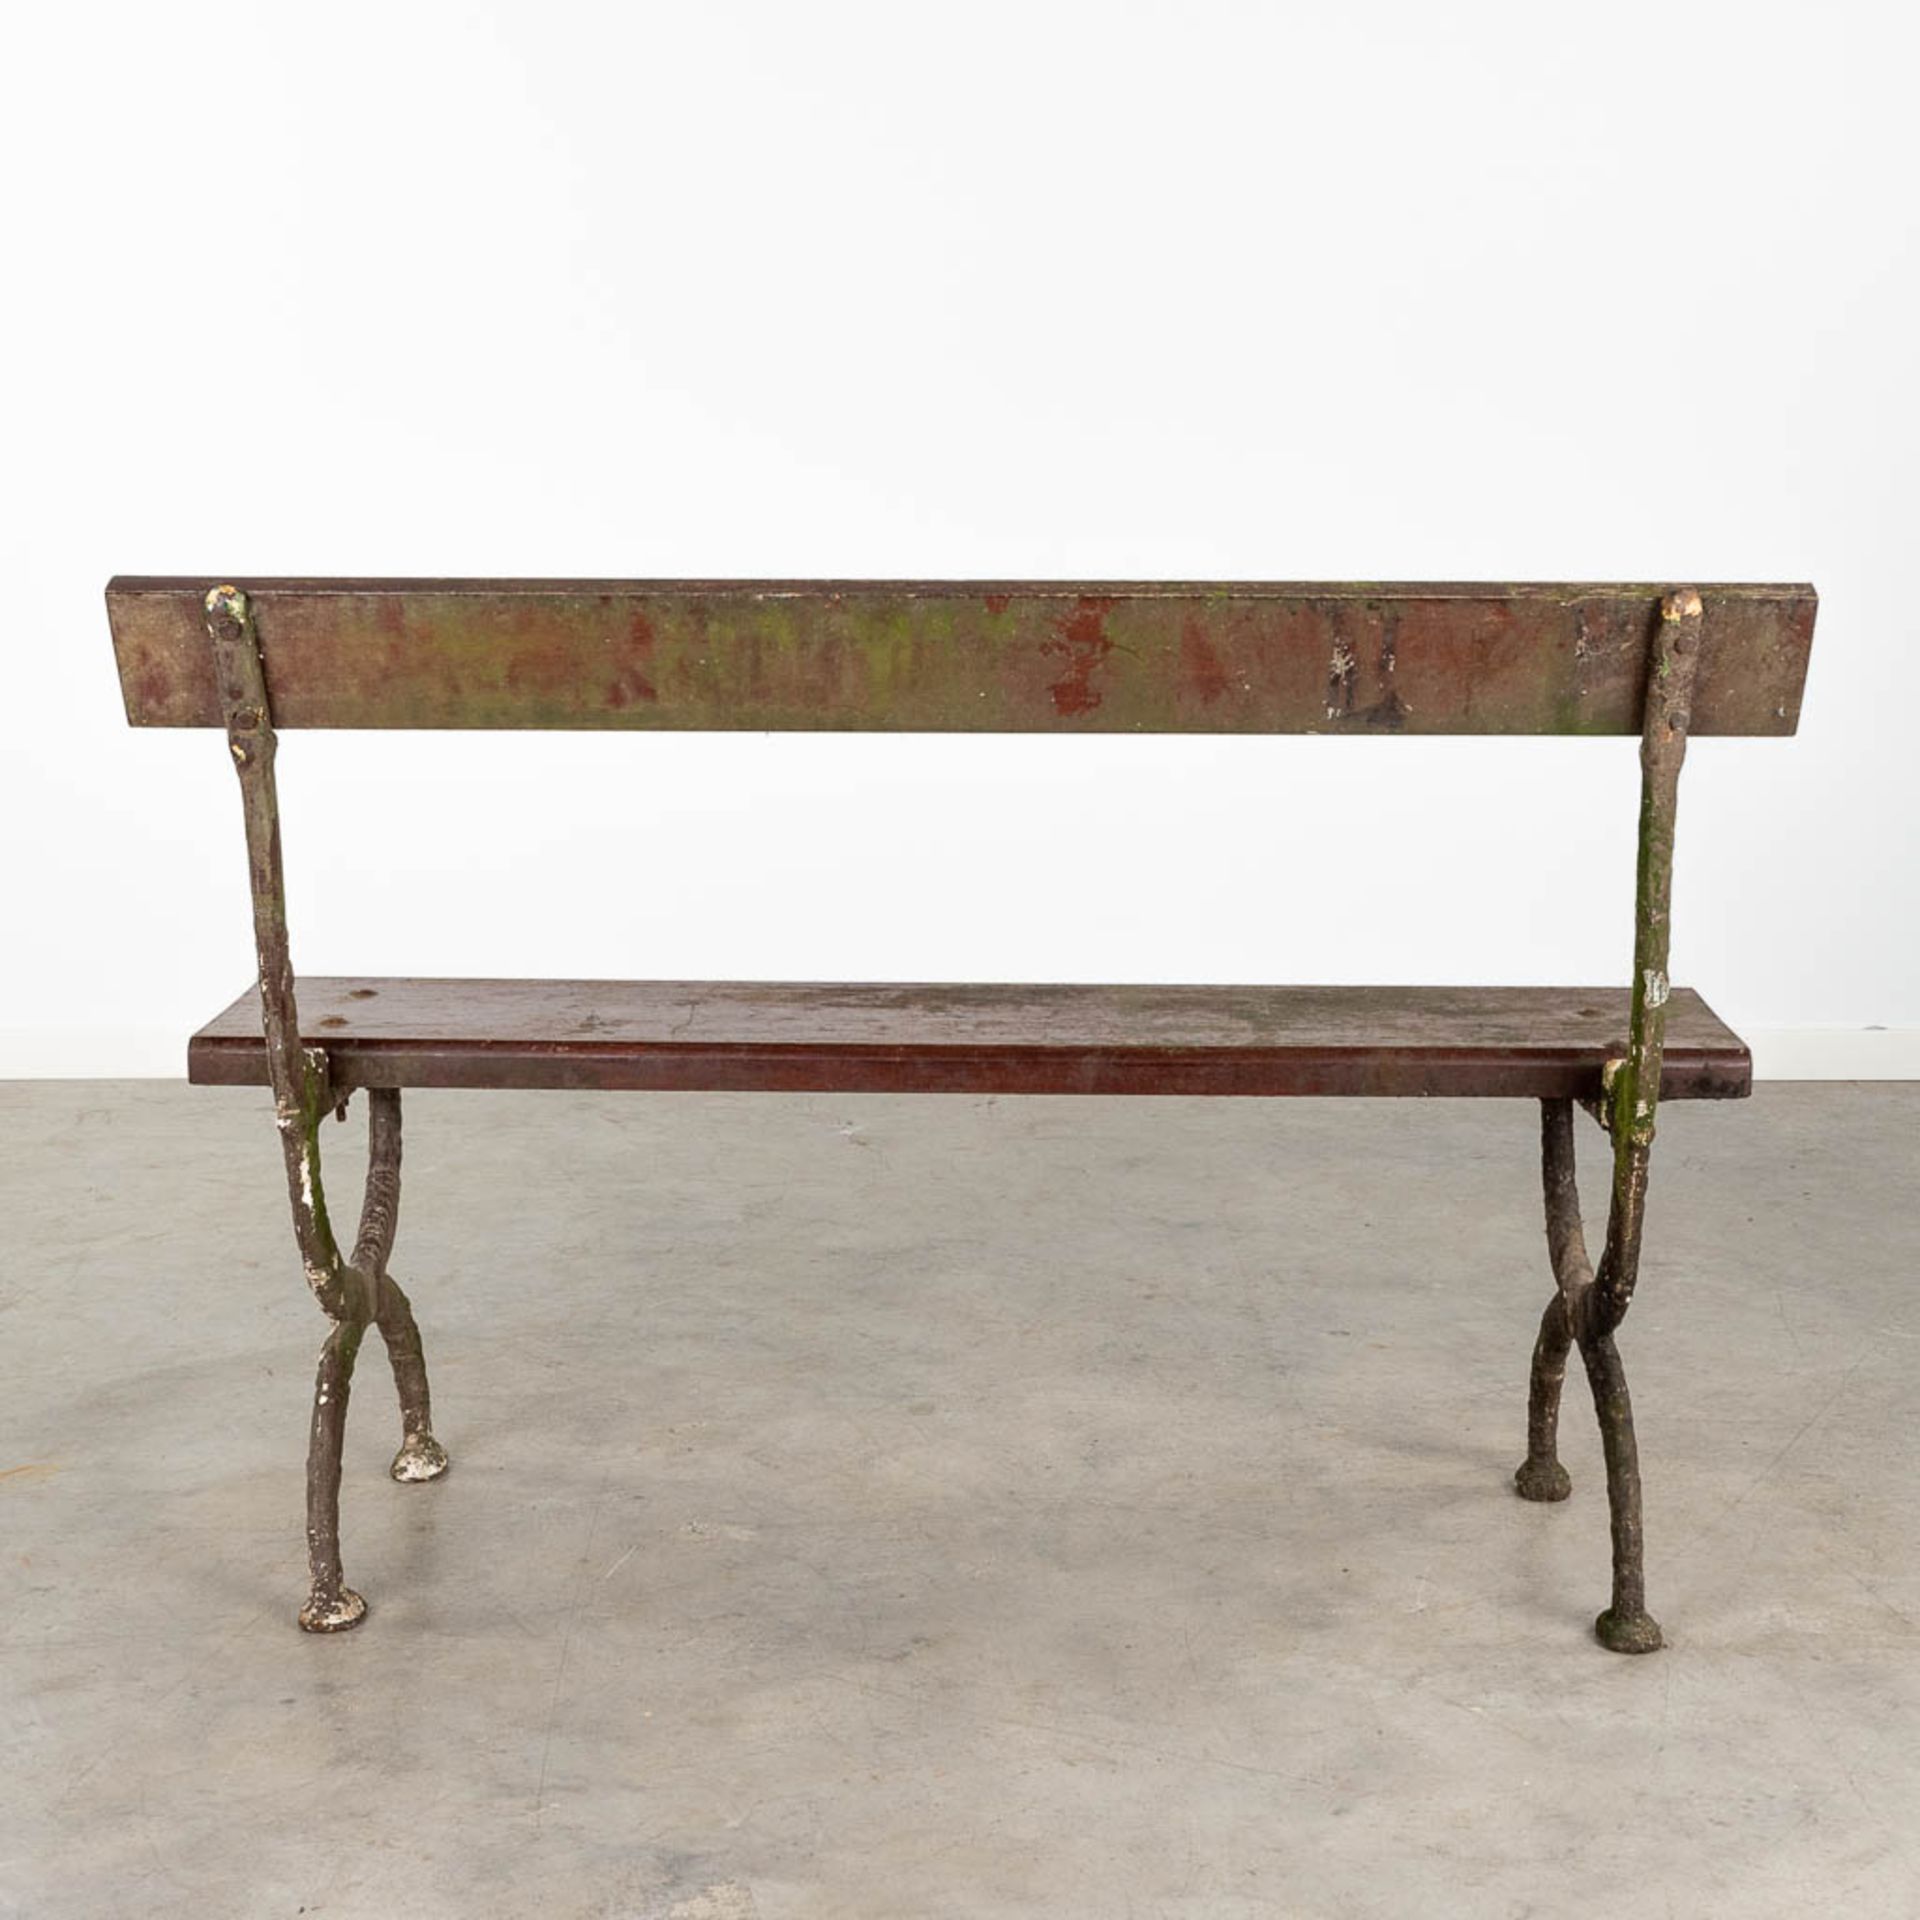 An antique garden bench, made of metal and wood. (L:46 x W:120 x H:82 cm) - Image 5 of 11